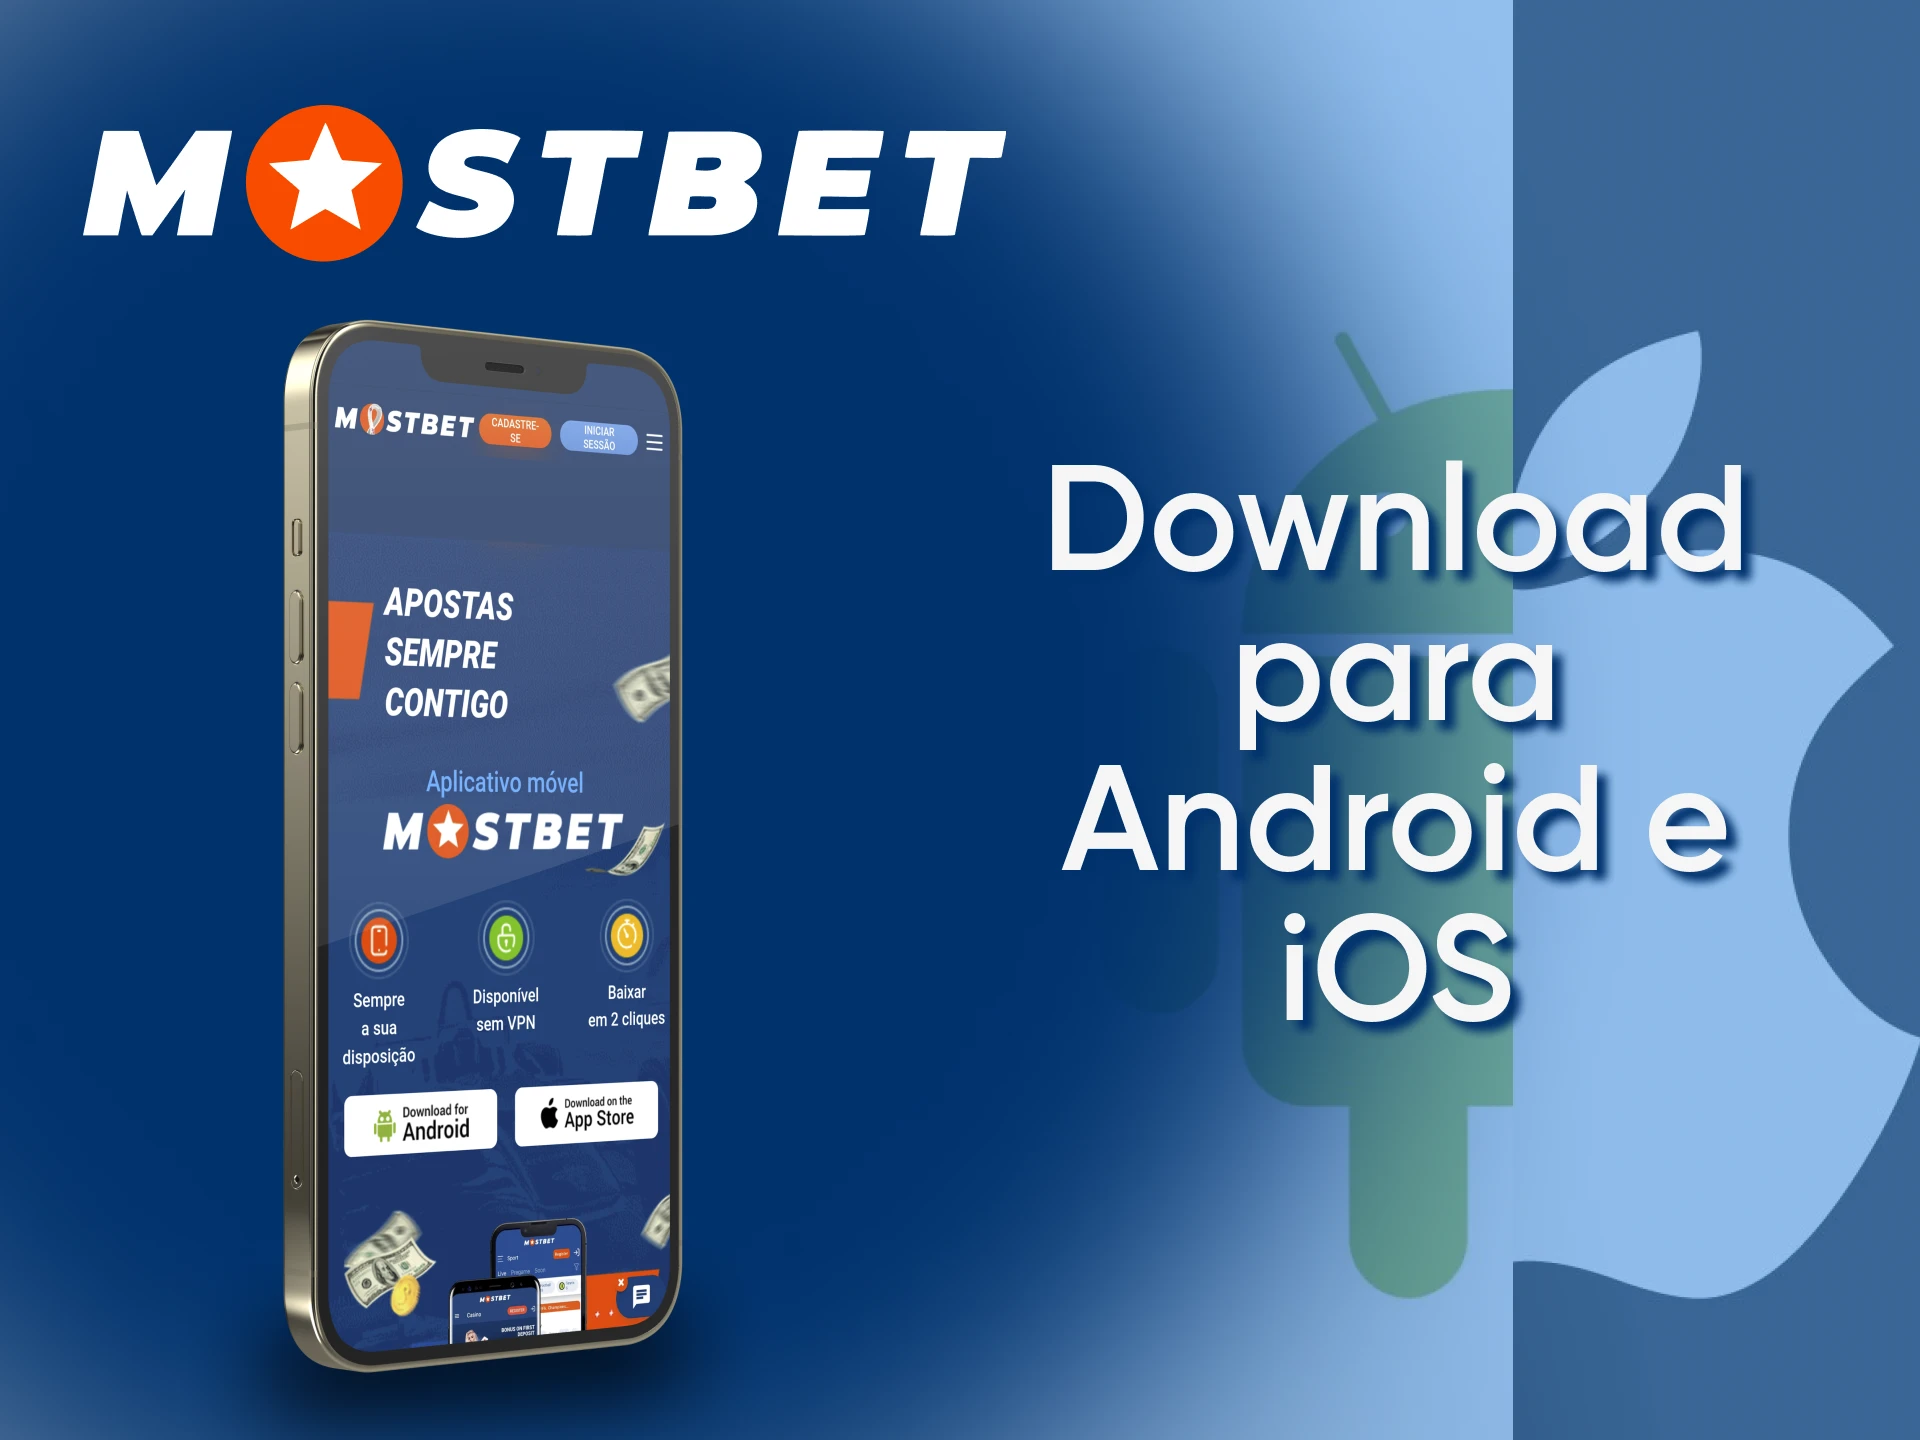 Install the Mostbet app for Android or iOS to play Aviator on your mobile device.